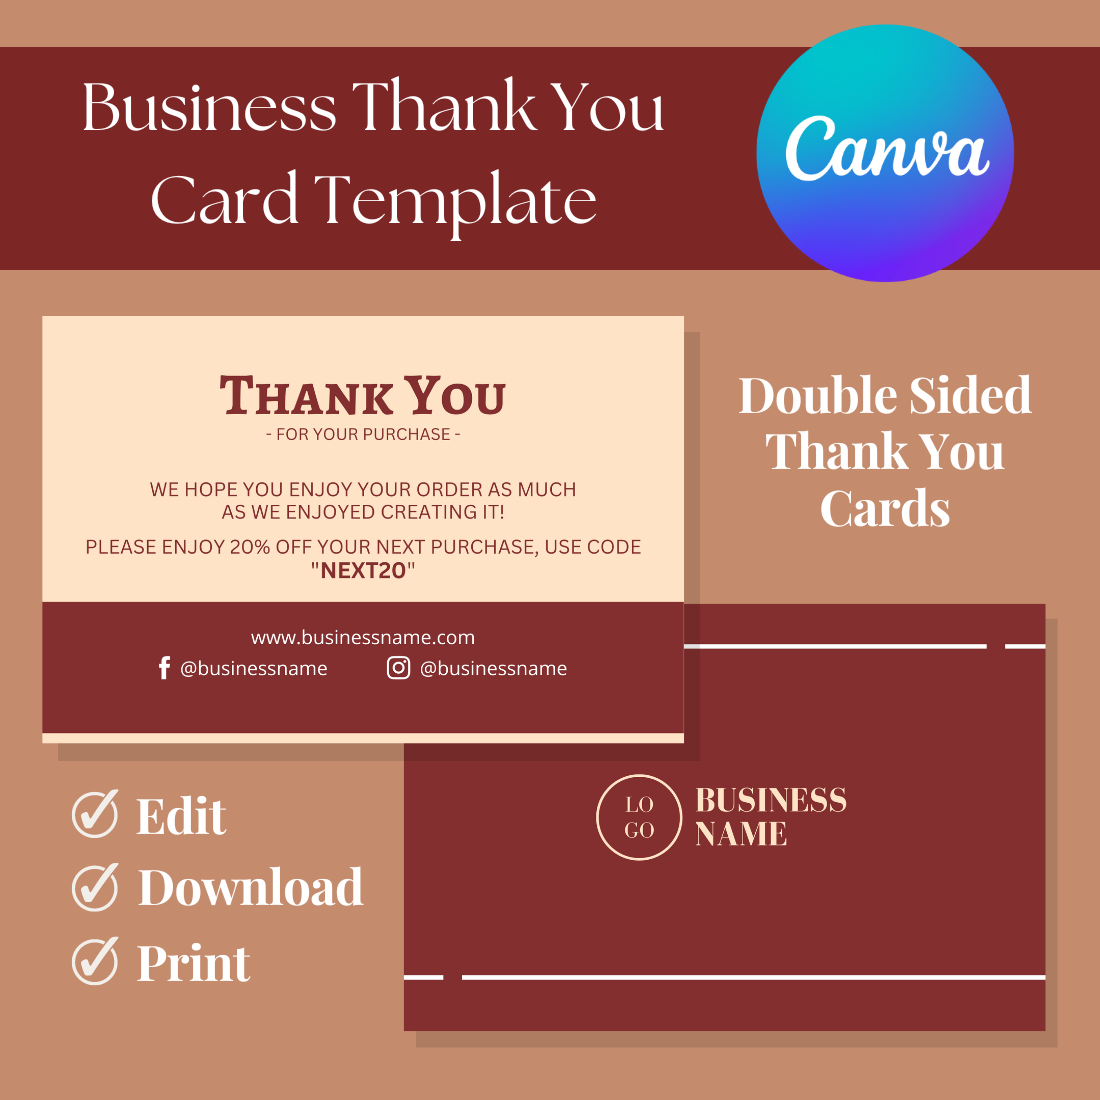 Printable Thank You Card Business Template cover image.